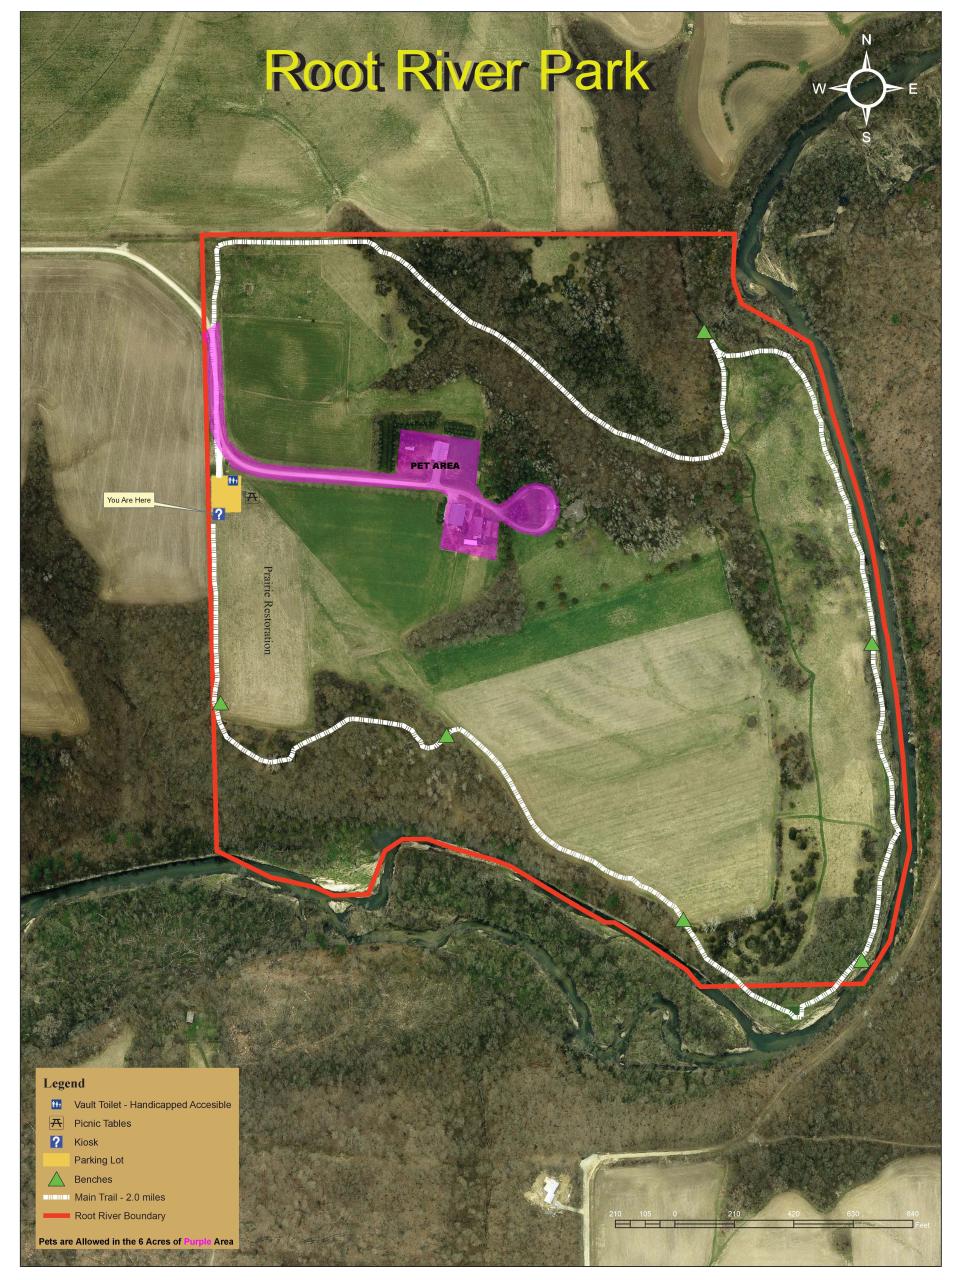 Outline of where pets are allowed on leash at Root River Park